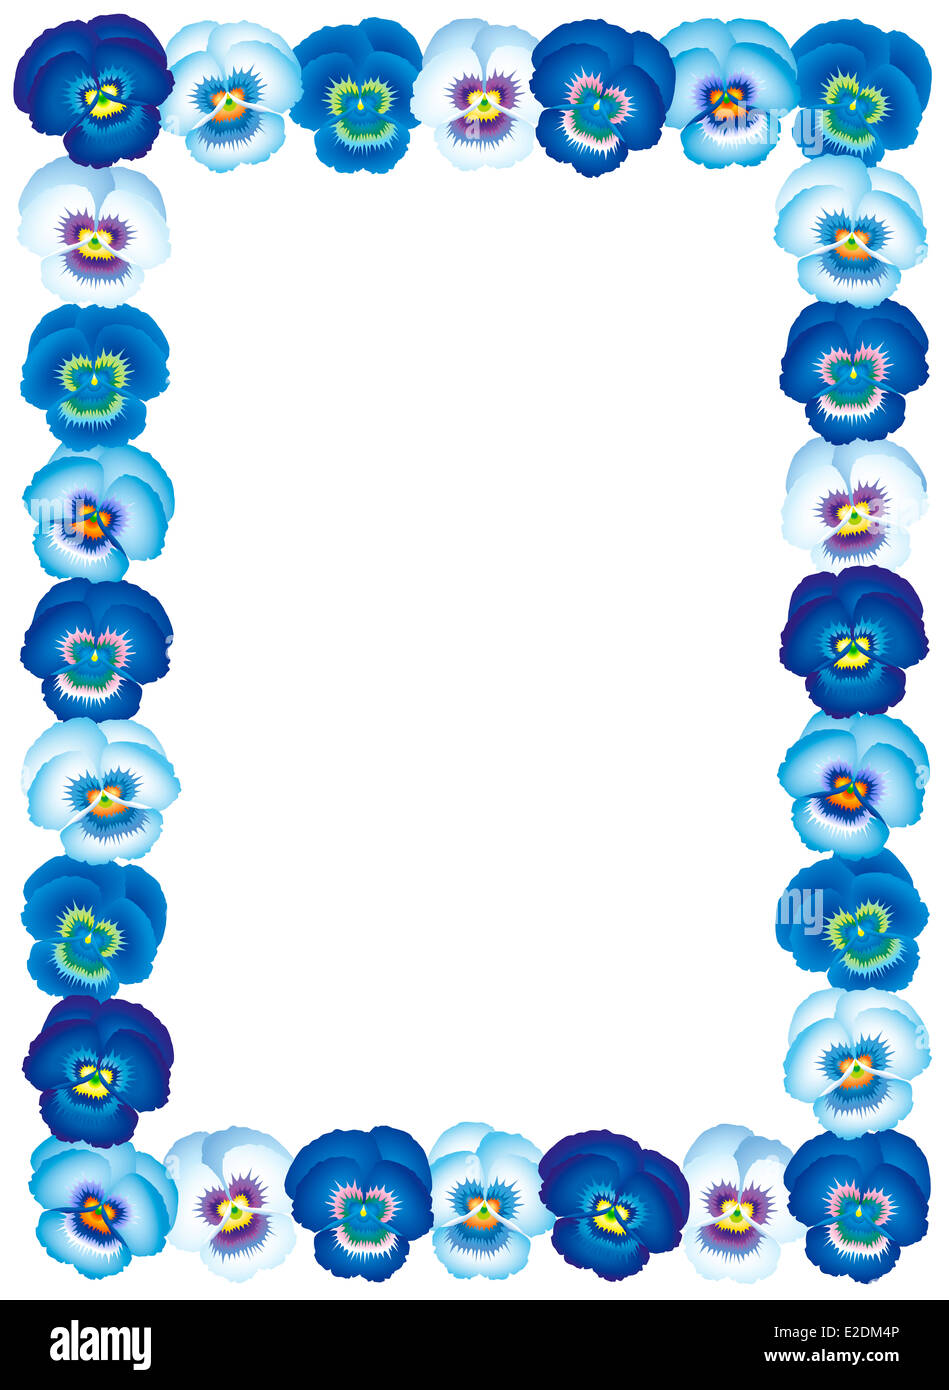 Vertical blue pansy frame. Stock Photo